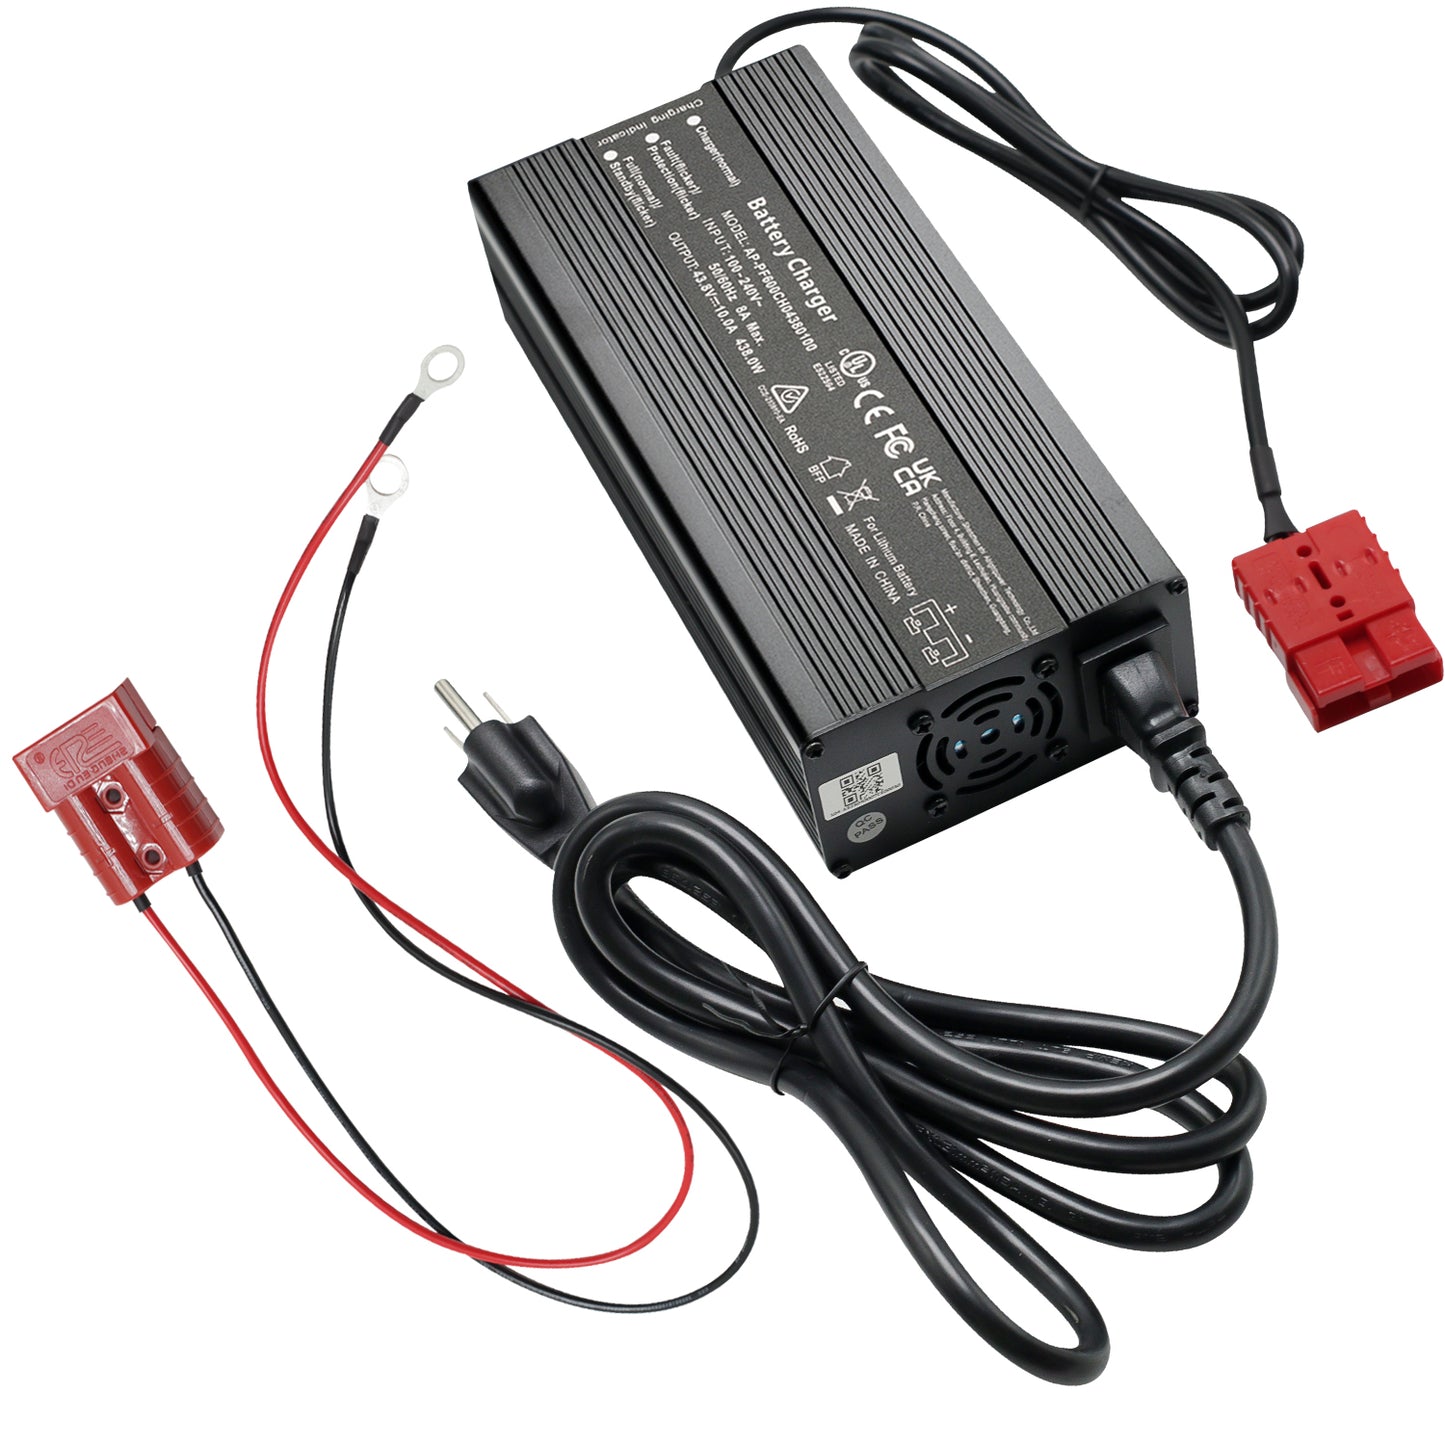 CHINS 36V 10A Lithium Battery Charger, Including UL Certification and 0V Charging Function, 43.8V 10A LiFePO4 Battery Charger, Special for 36V LiFePO4 Battery